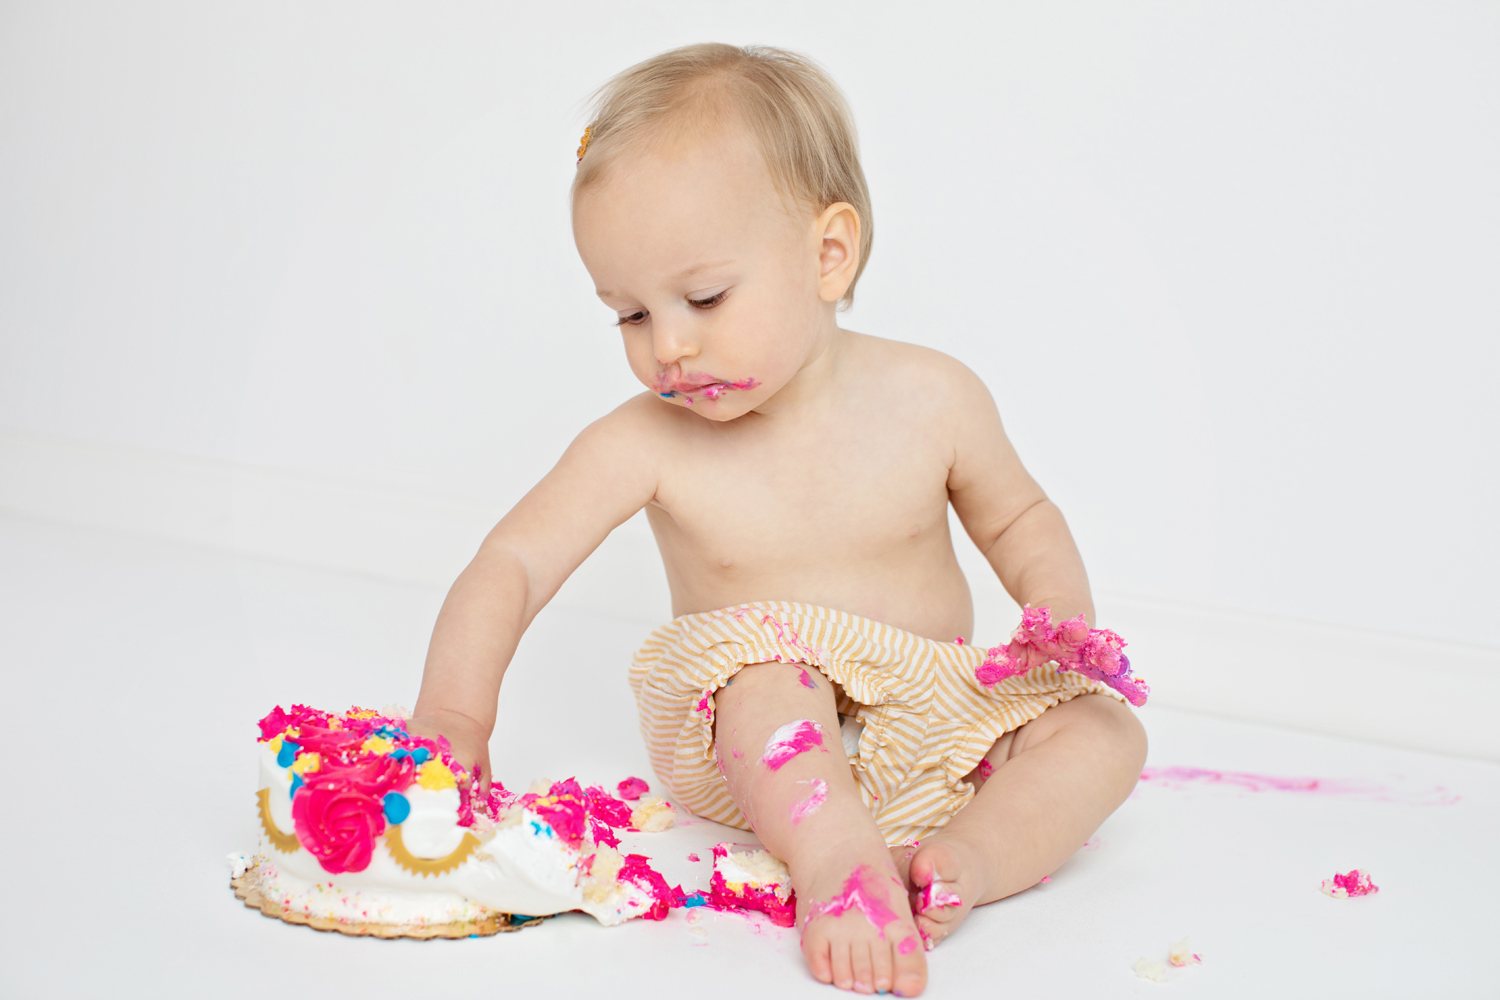 A one year old eats messy birthday cake.